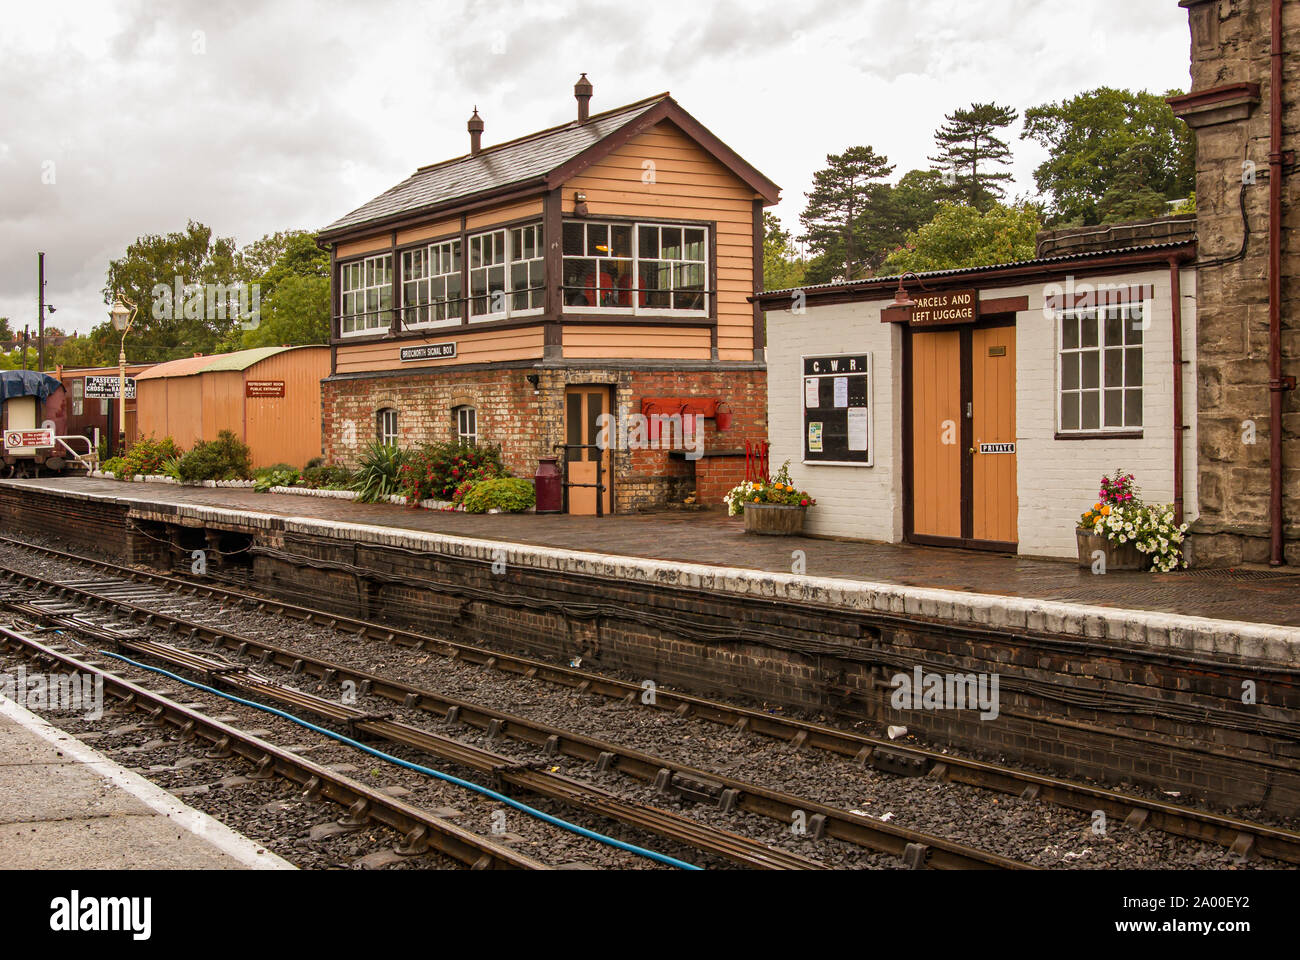 Old signal box on platform of railway station with train tracks in foreground Stock Photo